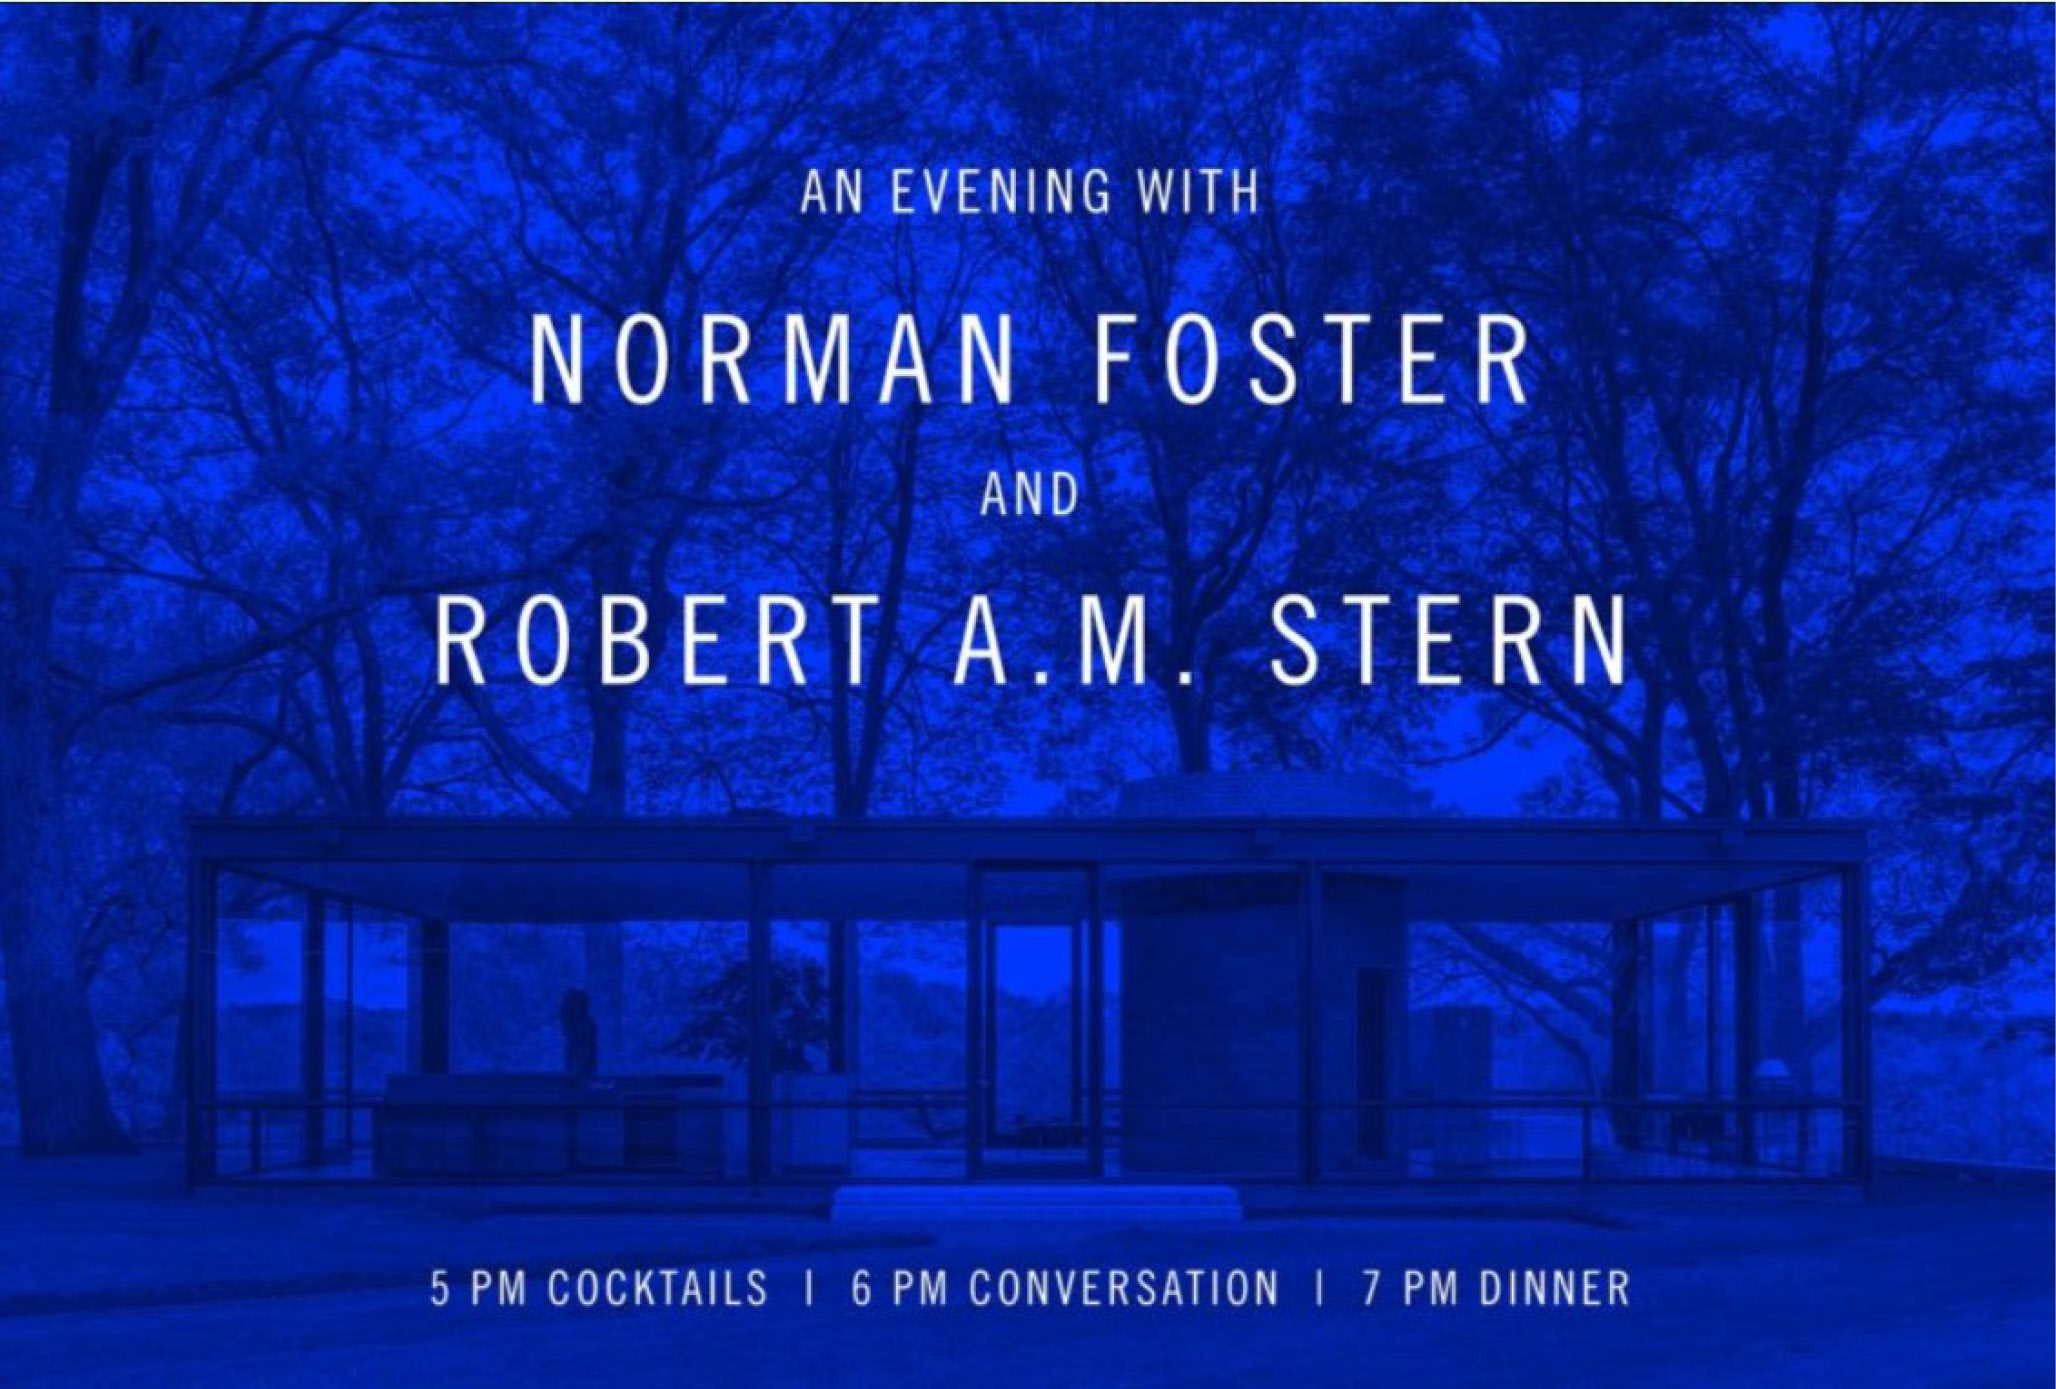 Robert A.M. Stern in Conversation with Norman Foster at the Glass House